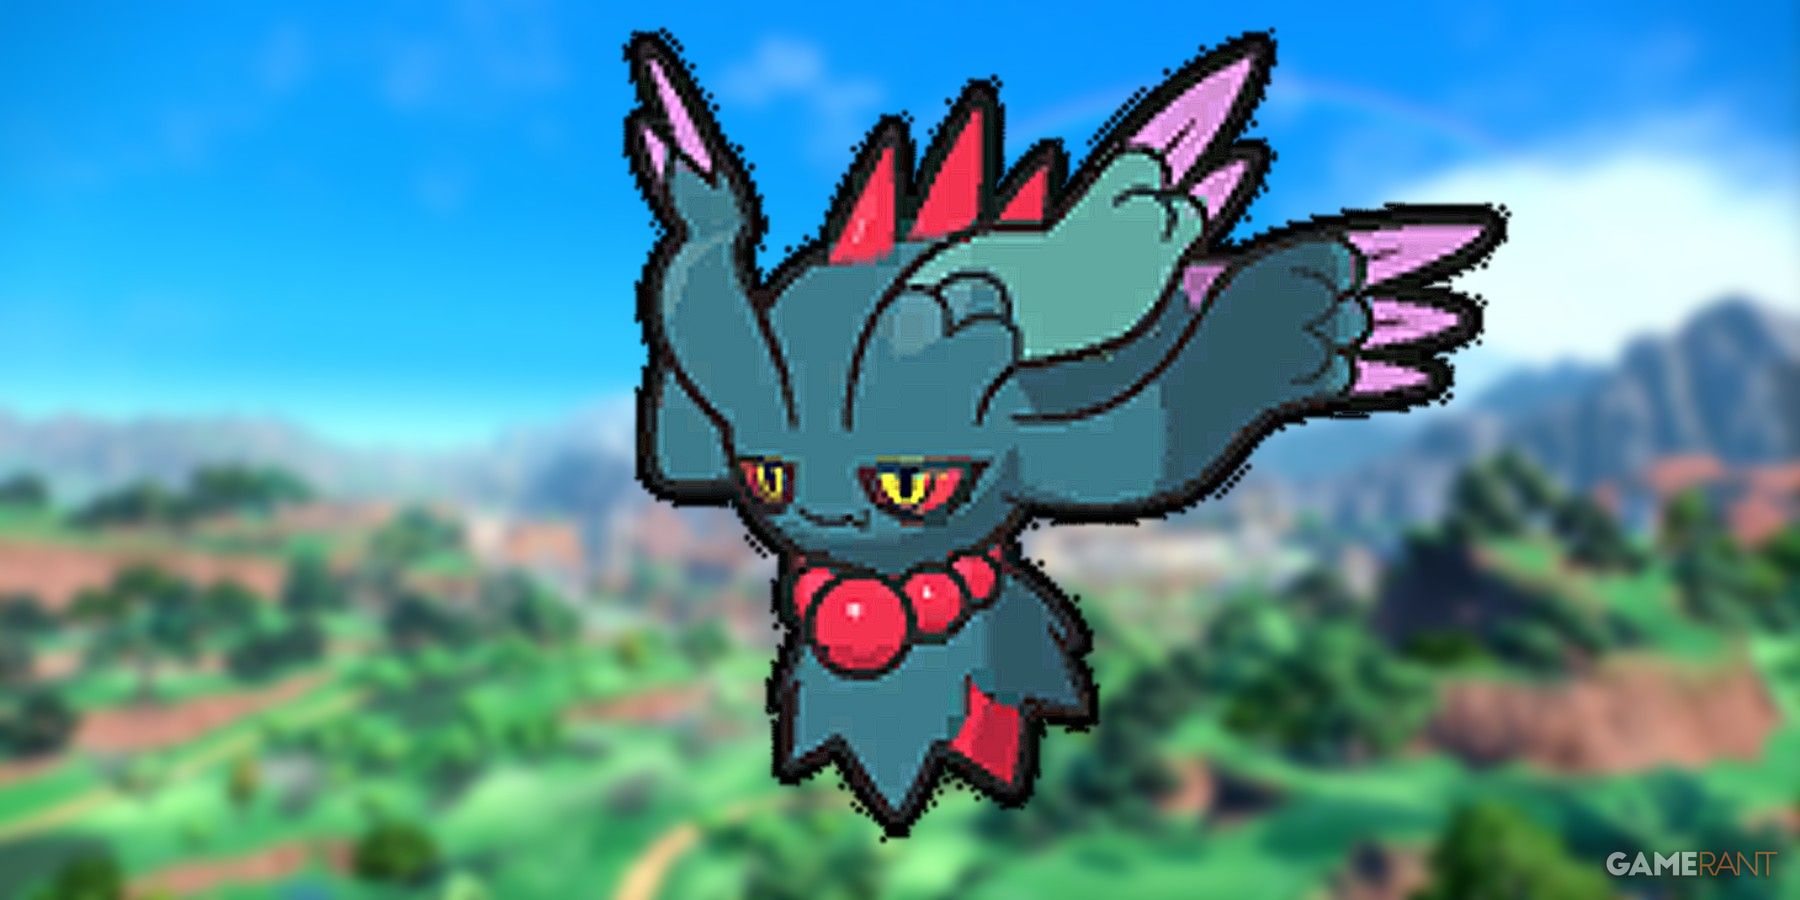 Can you breed paradox Pokémon in Scarlet & Violet?